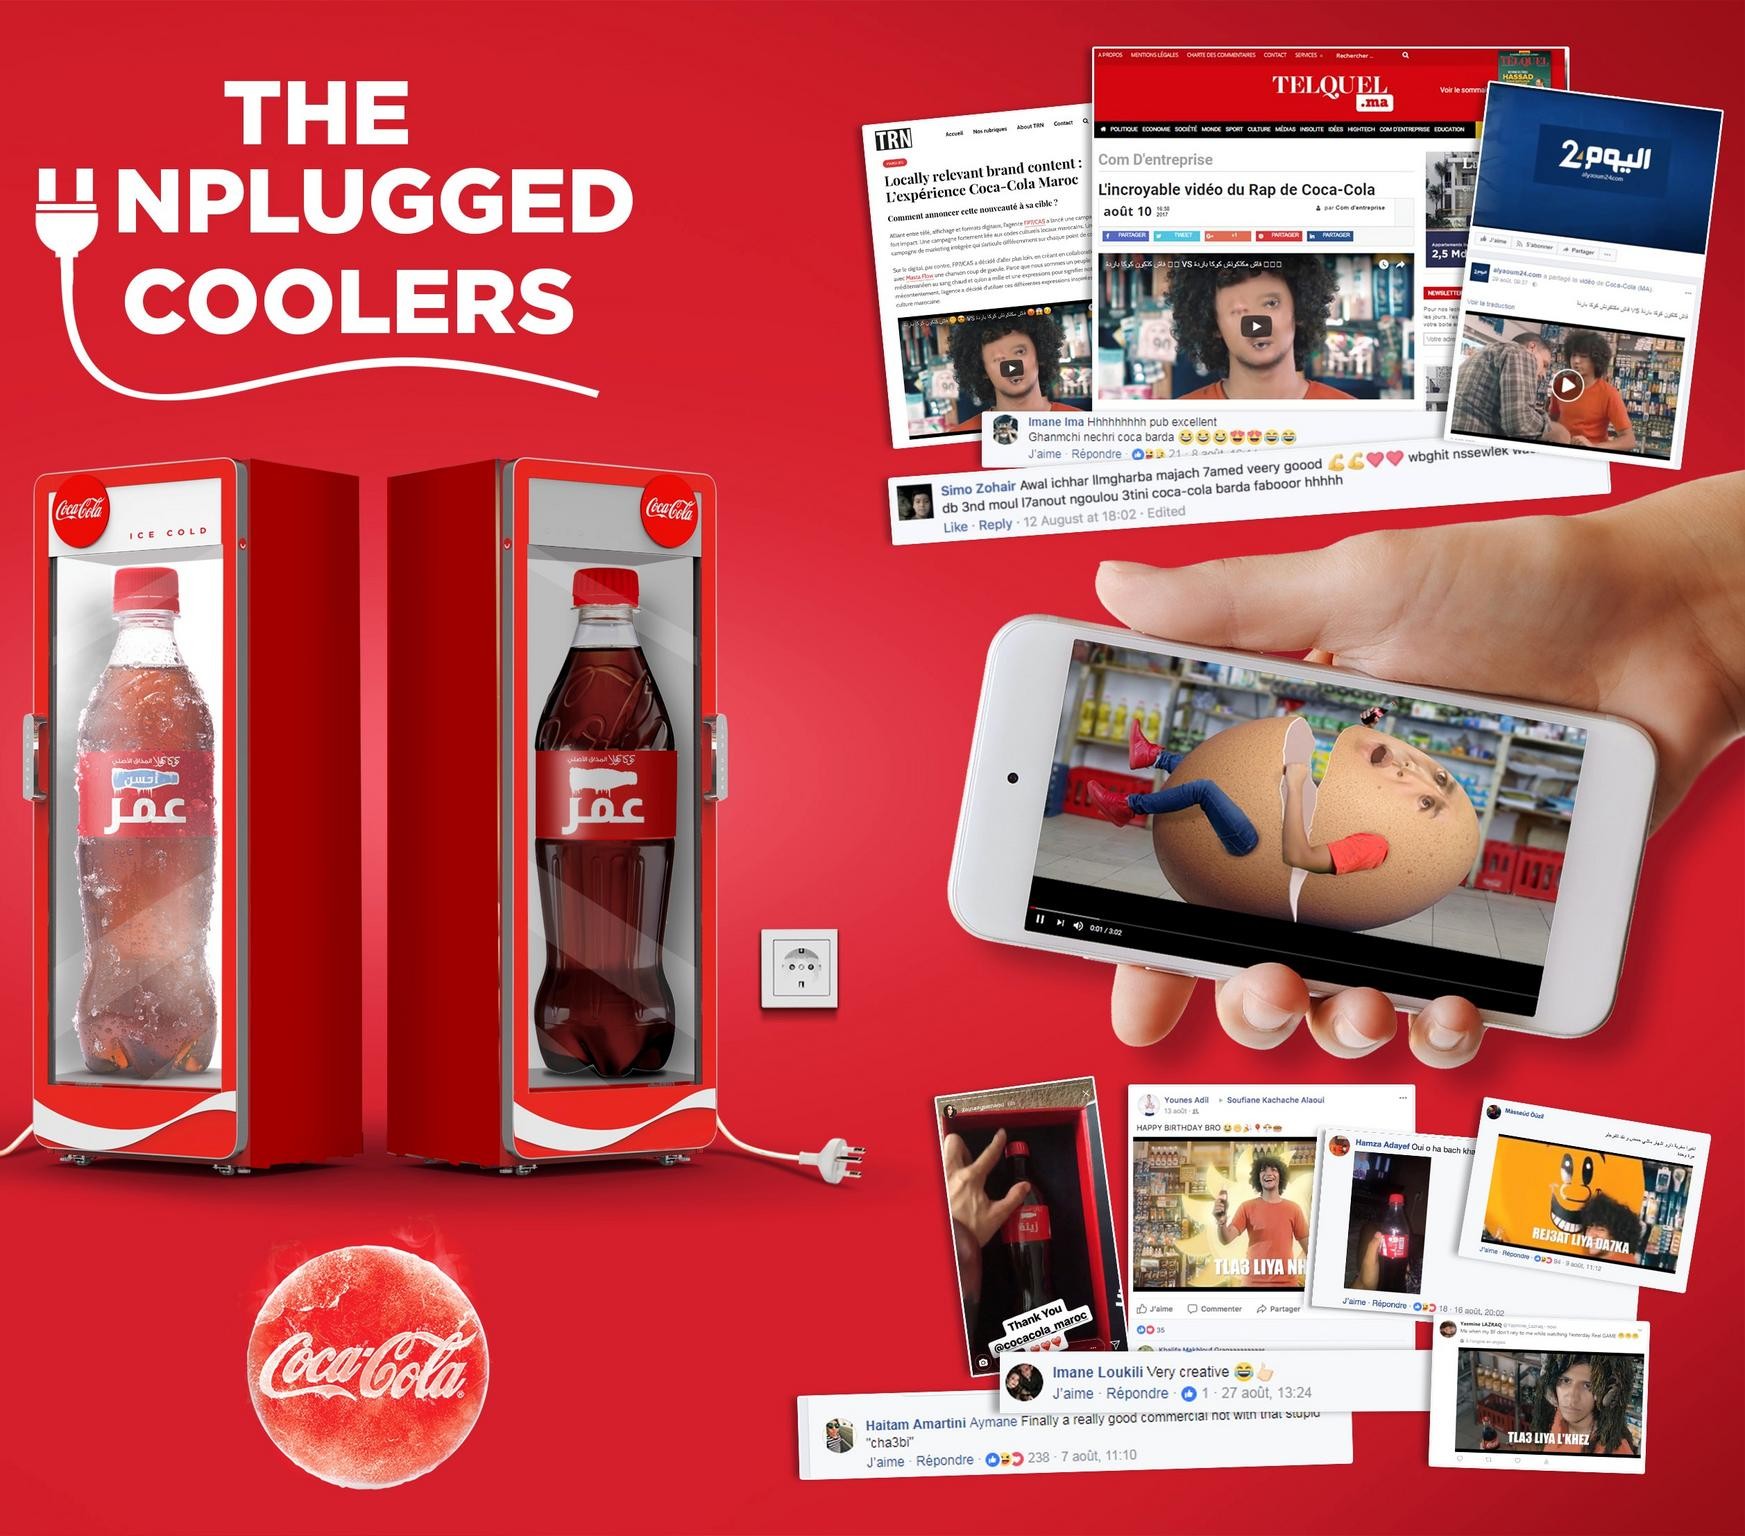 The unplugged coolers